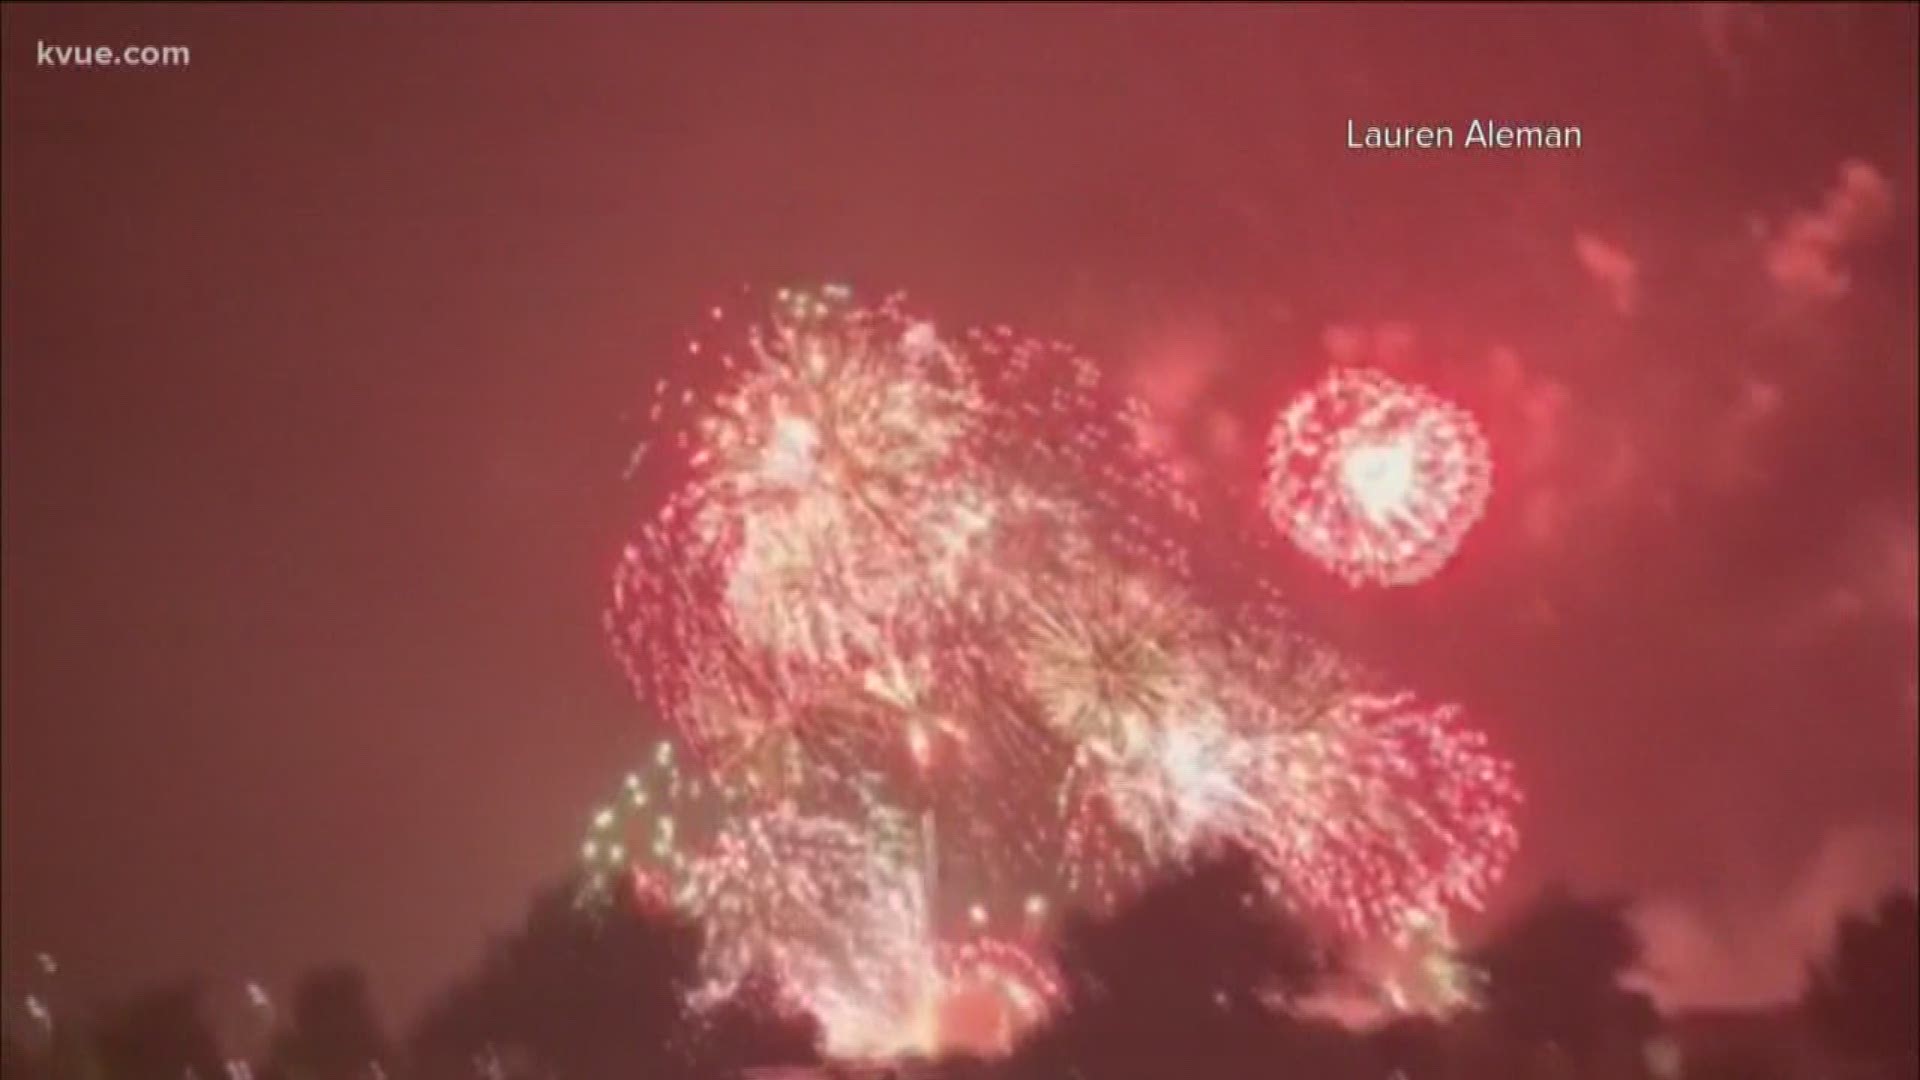 Things didn't go as planned during the Fourth of July firework show in Kyle after a malfunction caused several fireworks to go off at the same time.